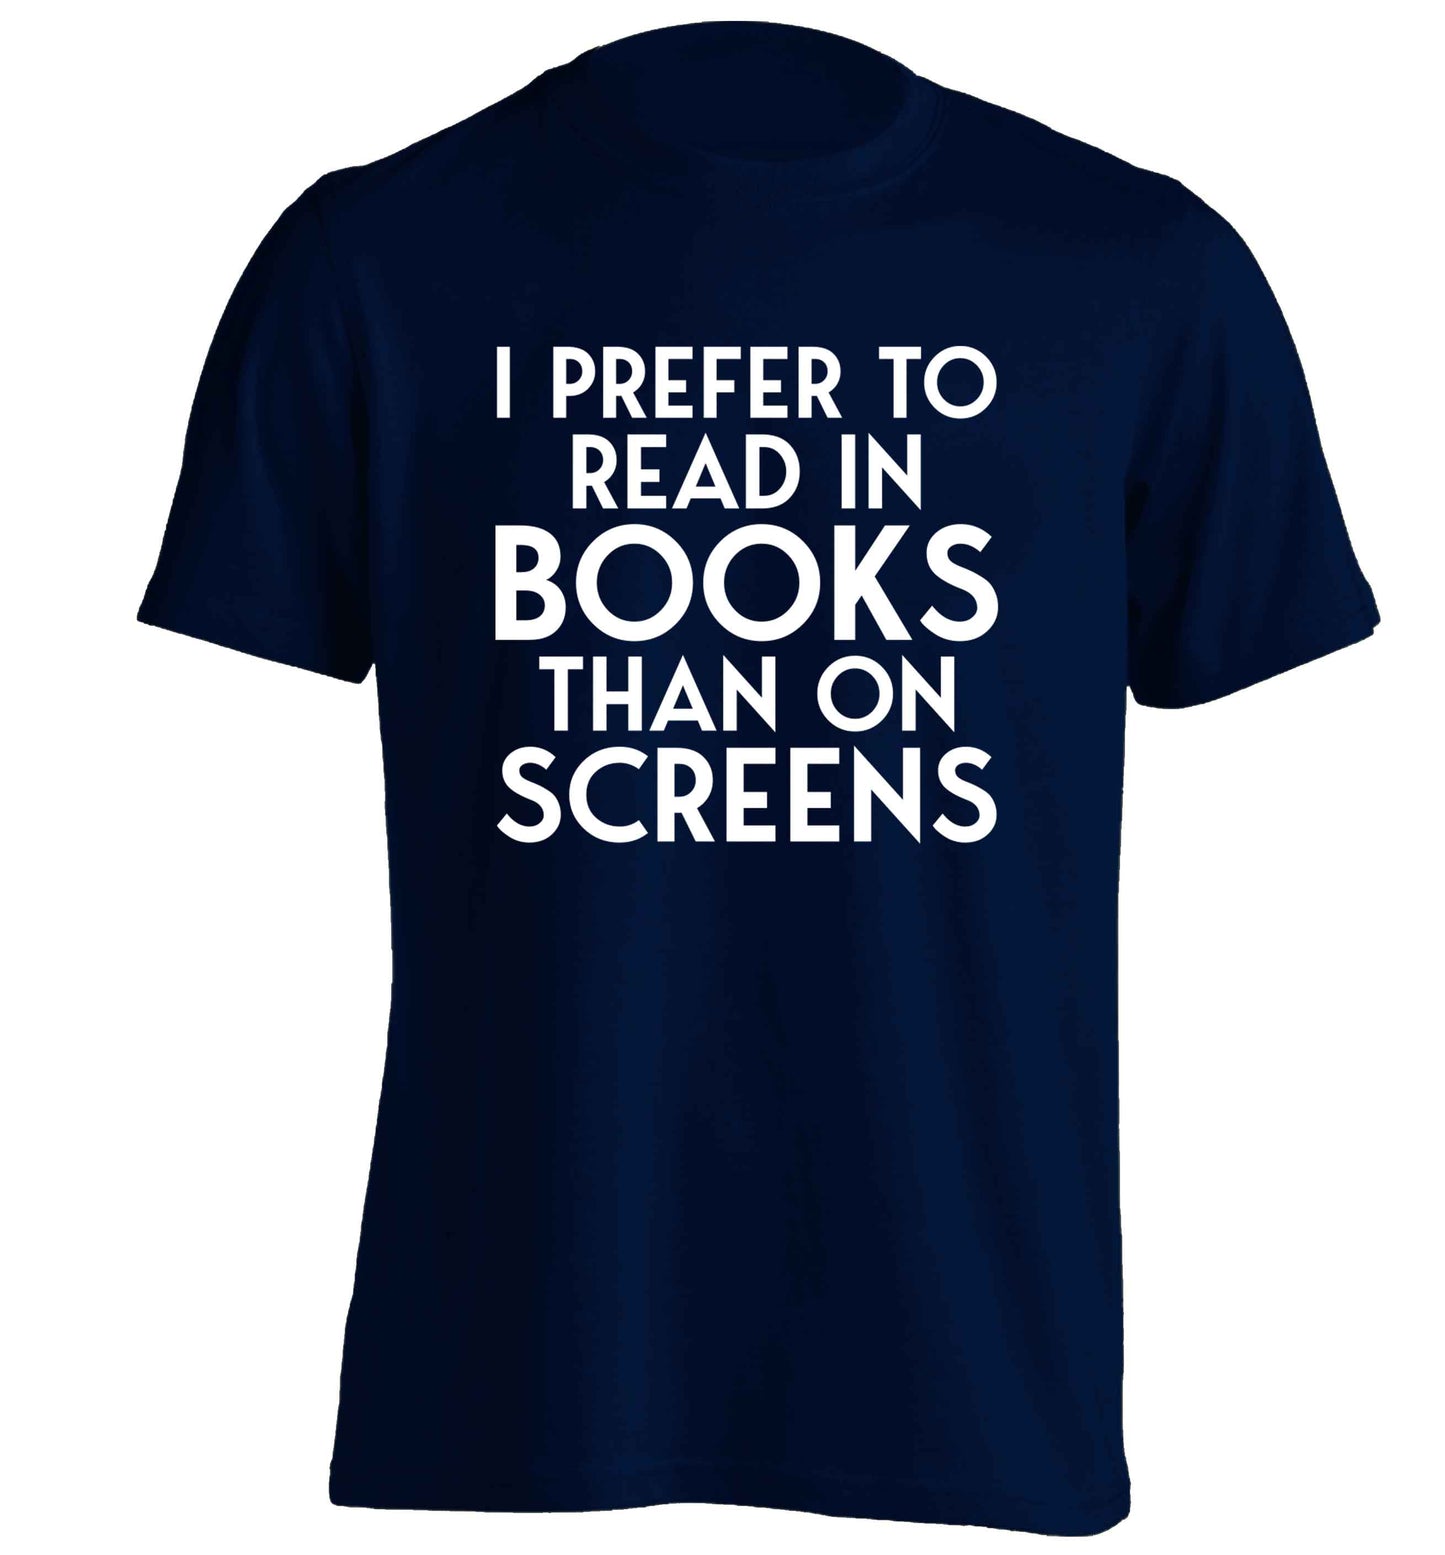 I prefer to read in books than on screens adults unisex navy Tshirt 2XL